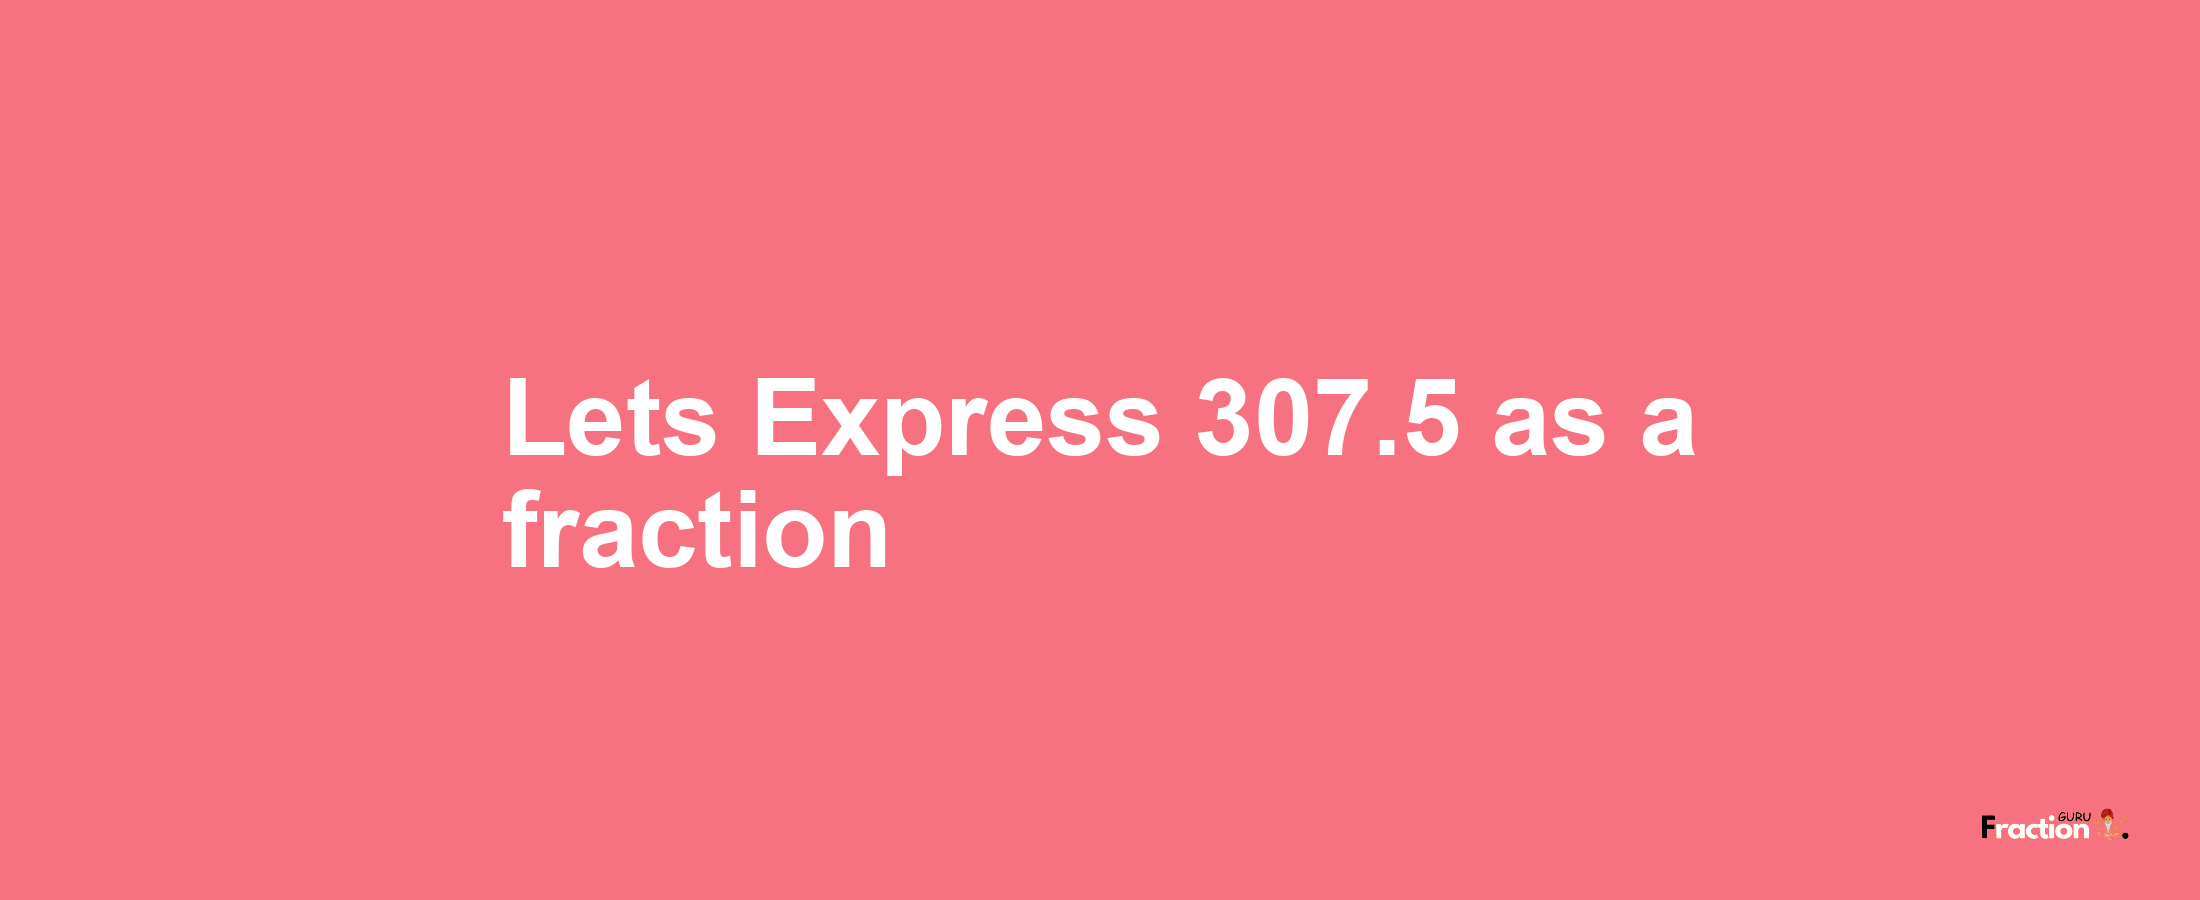 Lets Express 307.5 as afraction